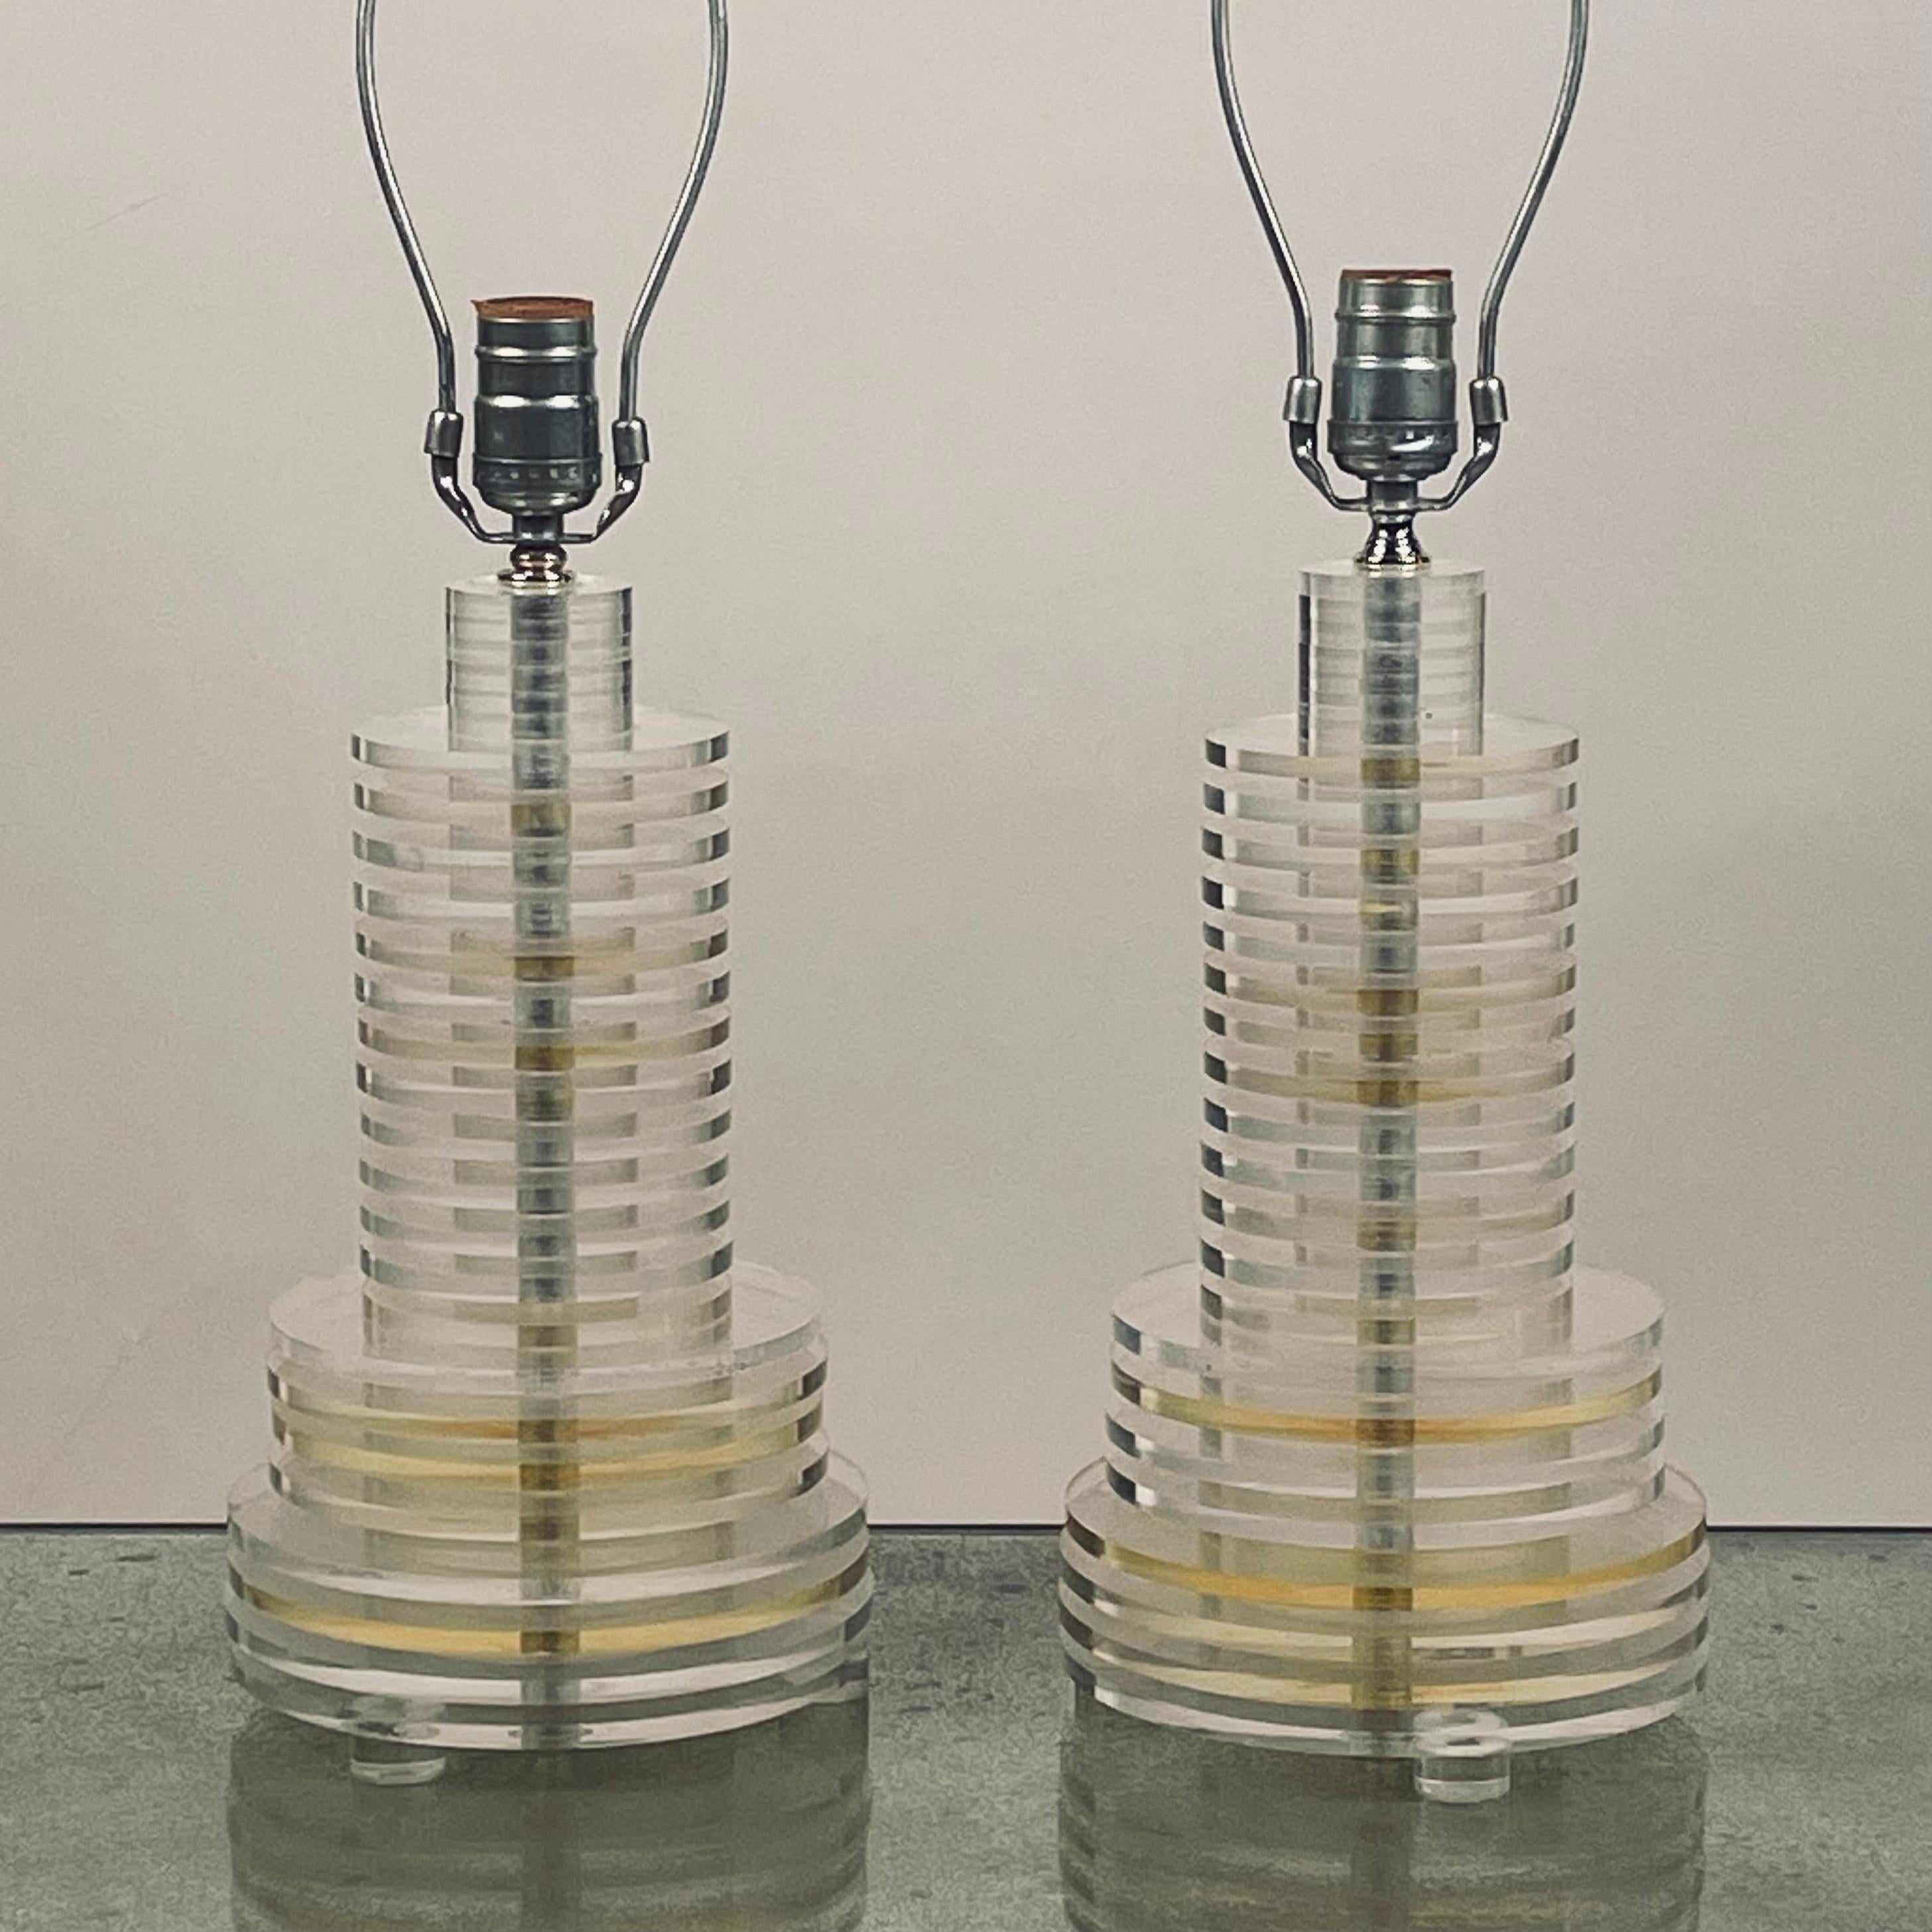 Pair of sculptural 70's clear and tinted lucite disc lamps.

Dimensions listed are for the lamp bases (to the finals). Shades are not included.